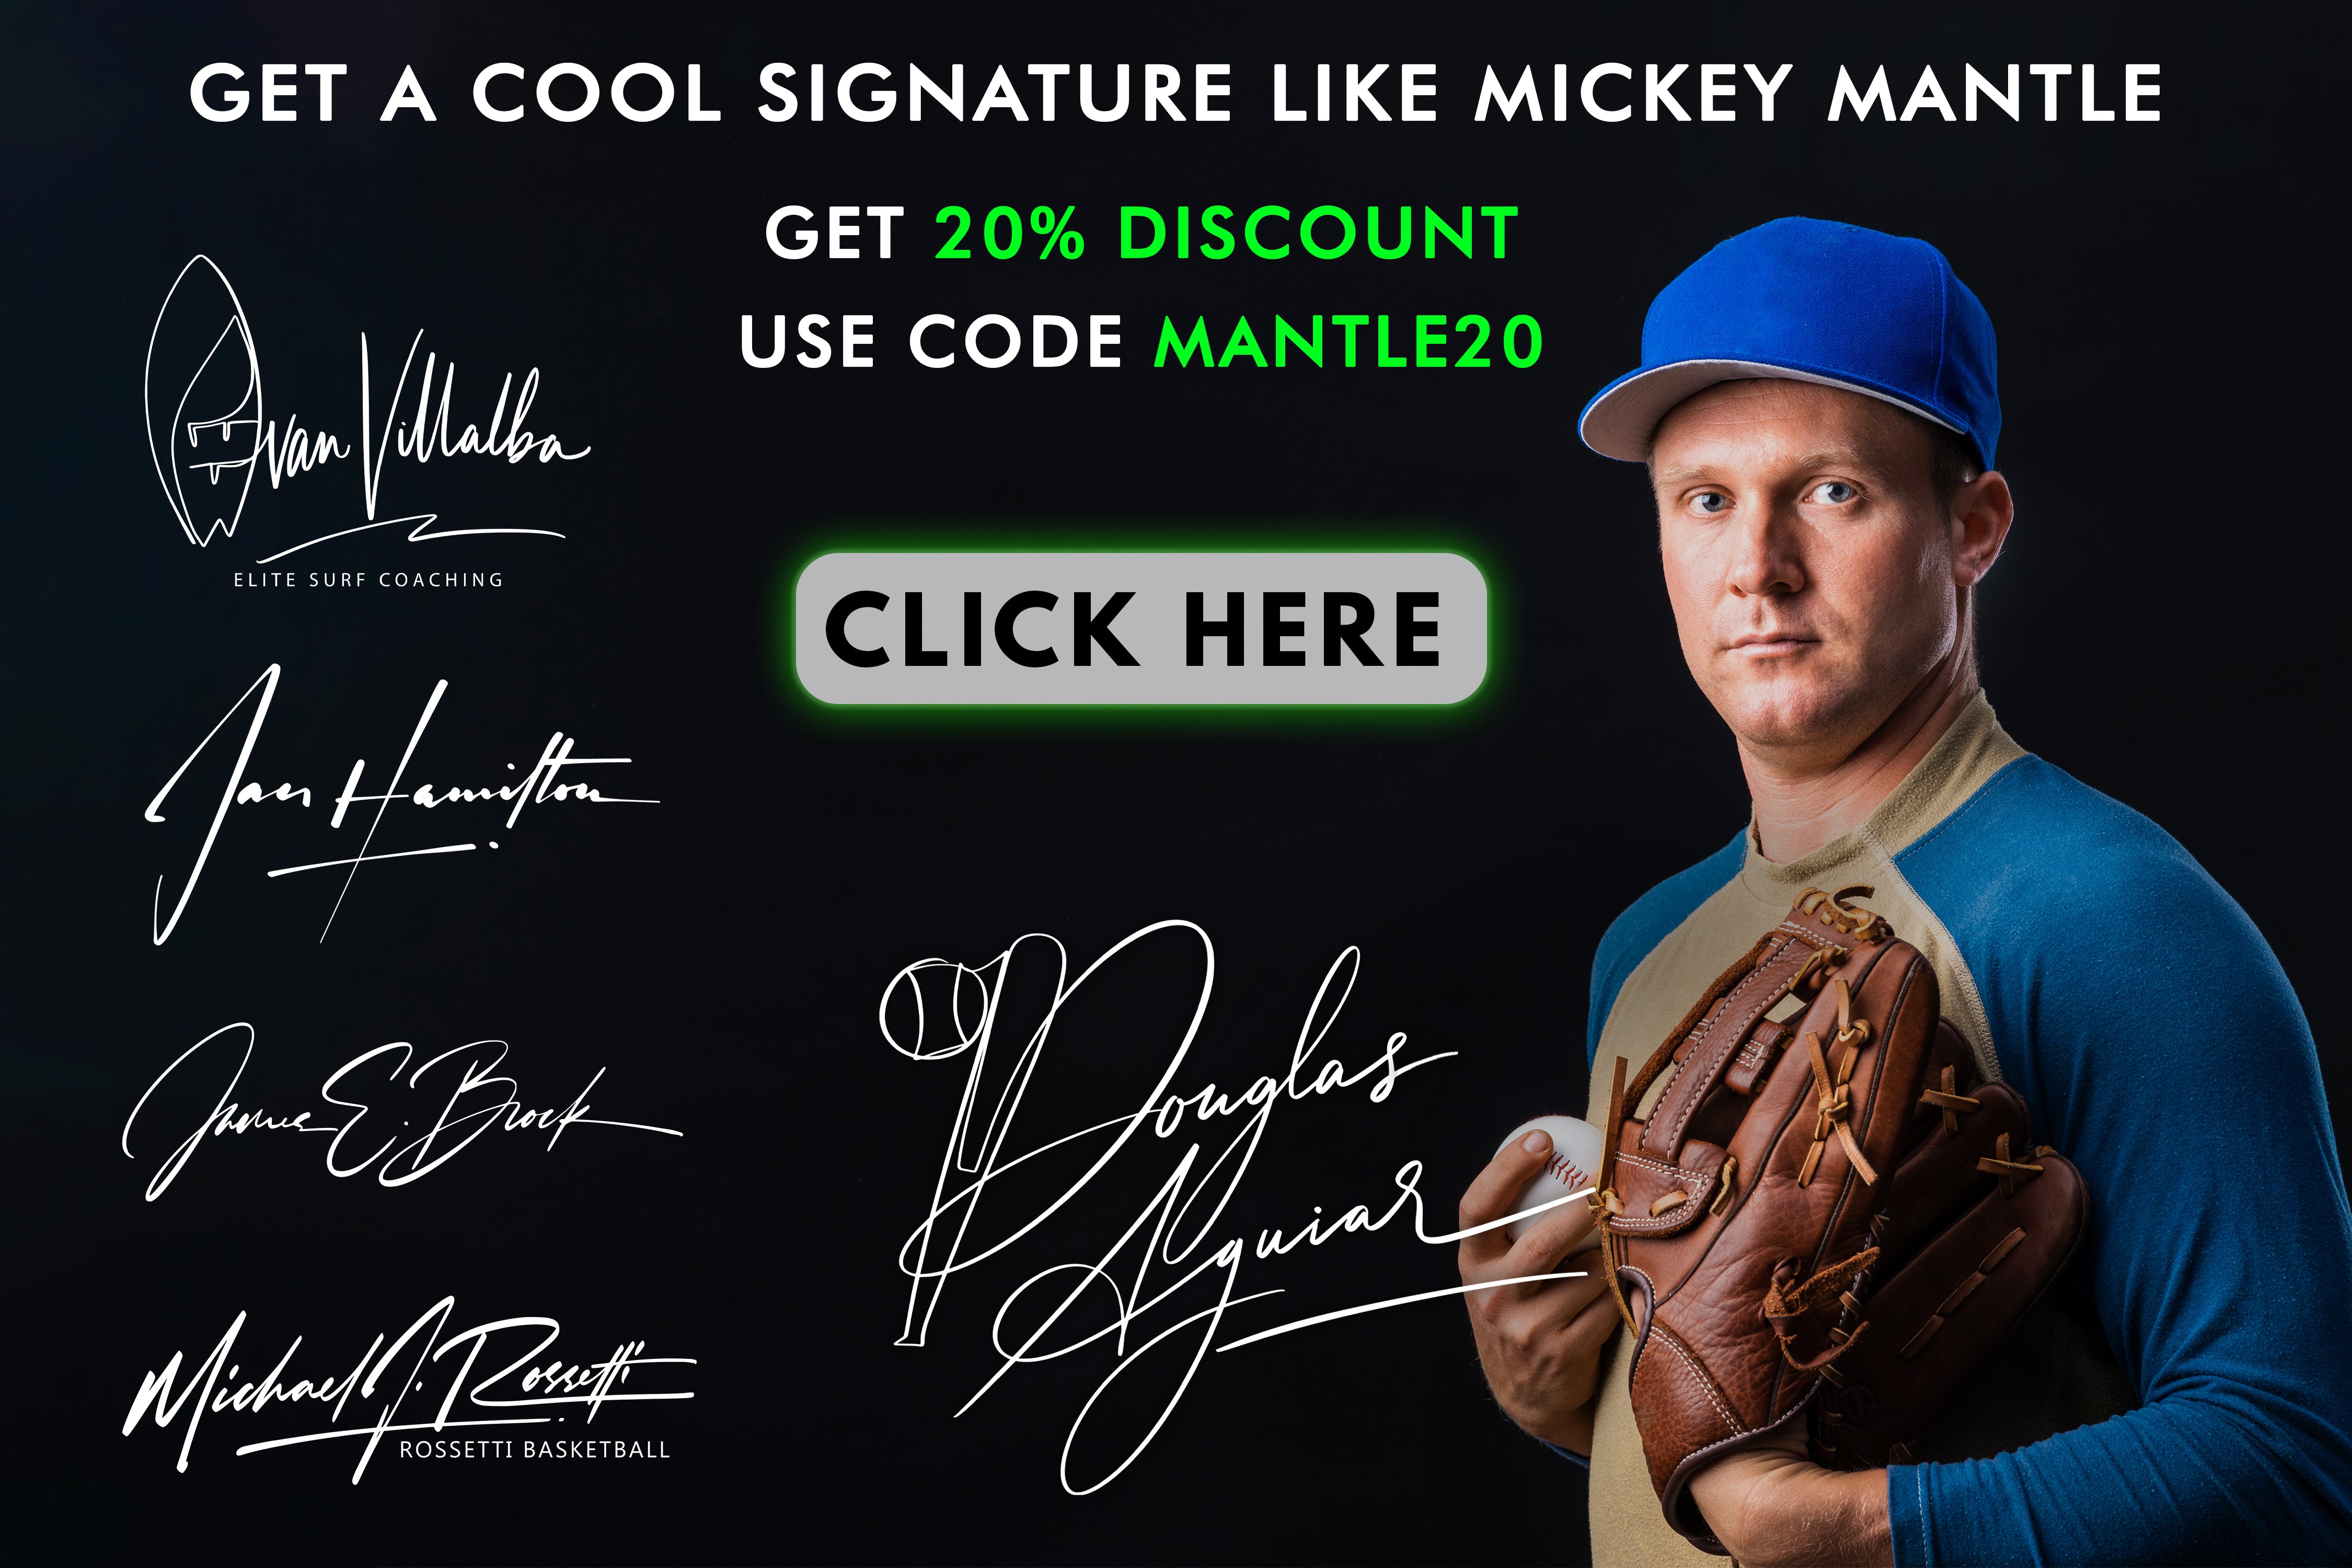 Learn about the history and worth of a Mickey Mantle autograph at ArtLogo’s blog. Find out how to appraise its value in today's market.